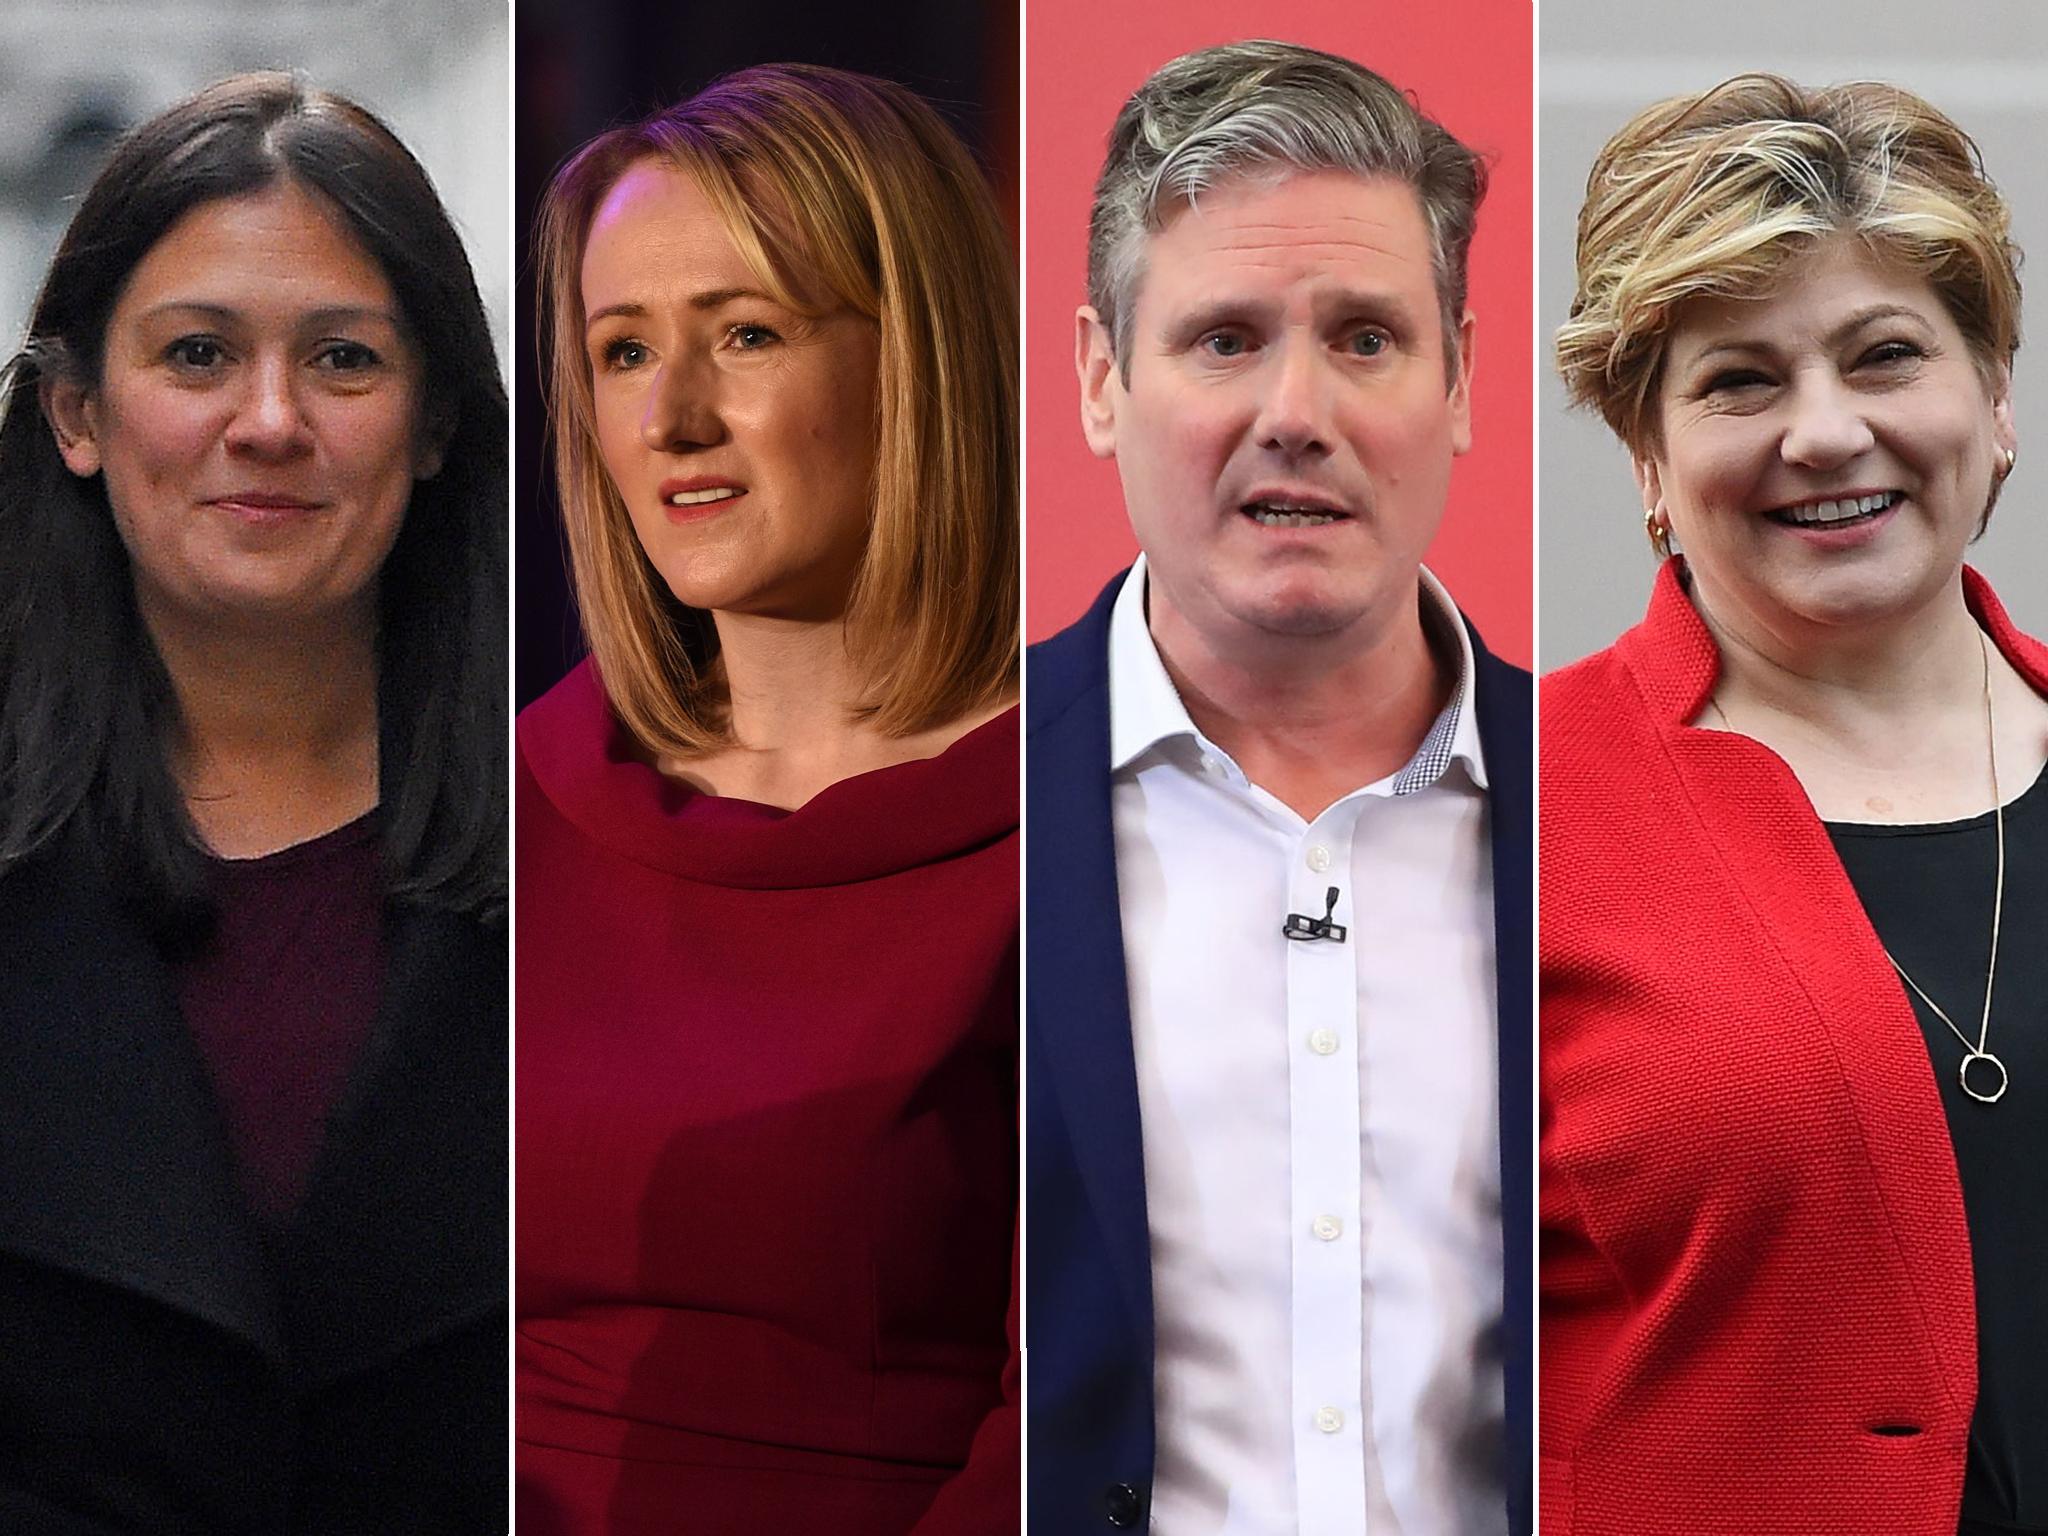 Lisa Nandy, Rebecca Long-Bailey, Keir Starmer and Emily Thornberry are all hoping to succeed Jeremy Corbyn